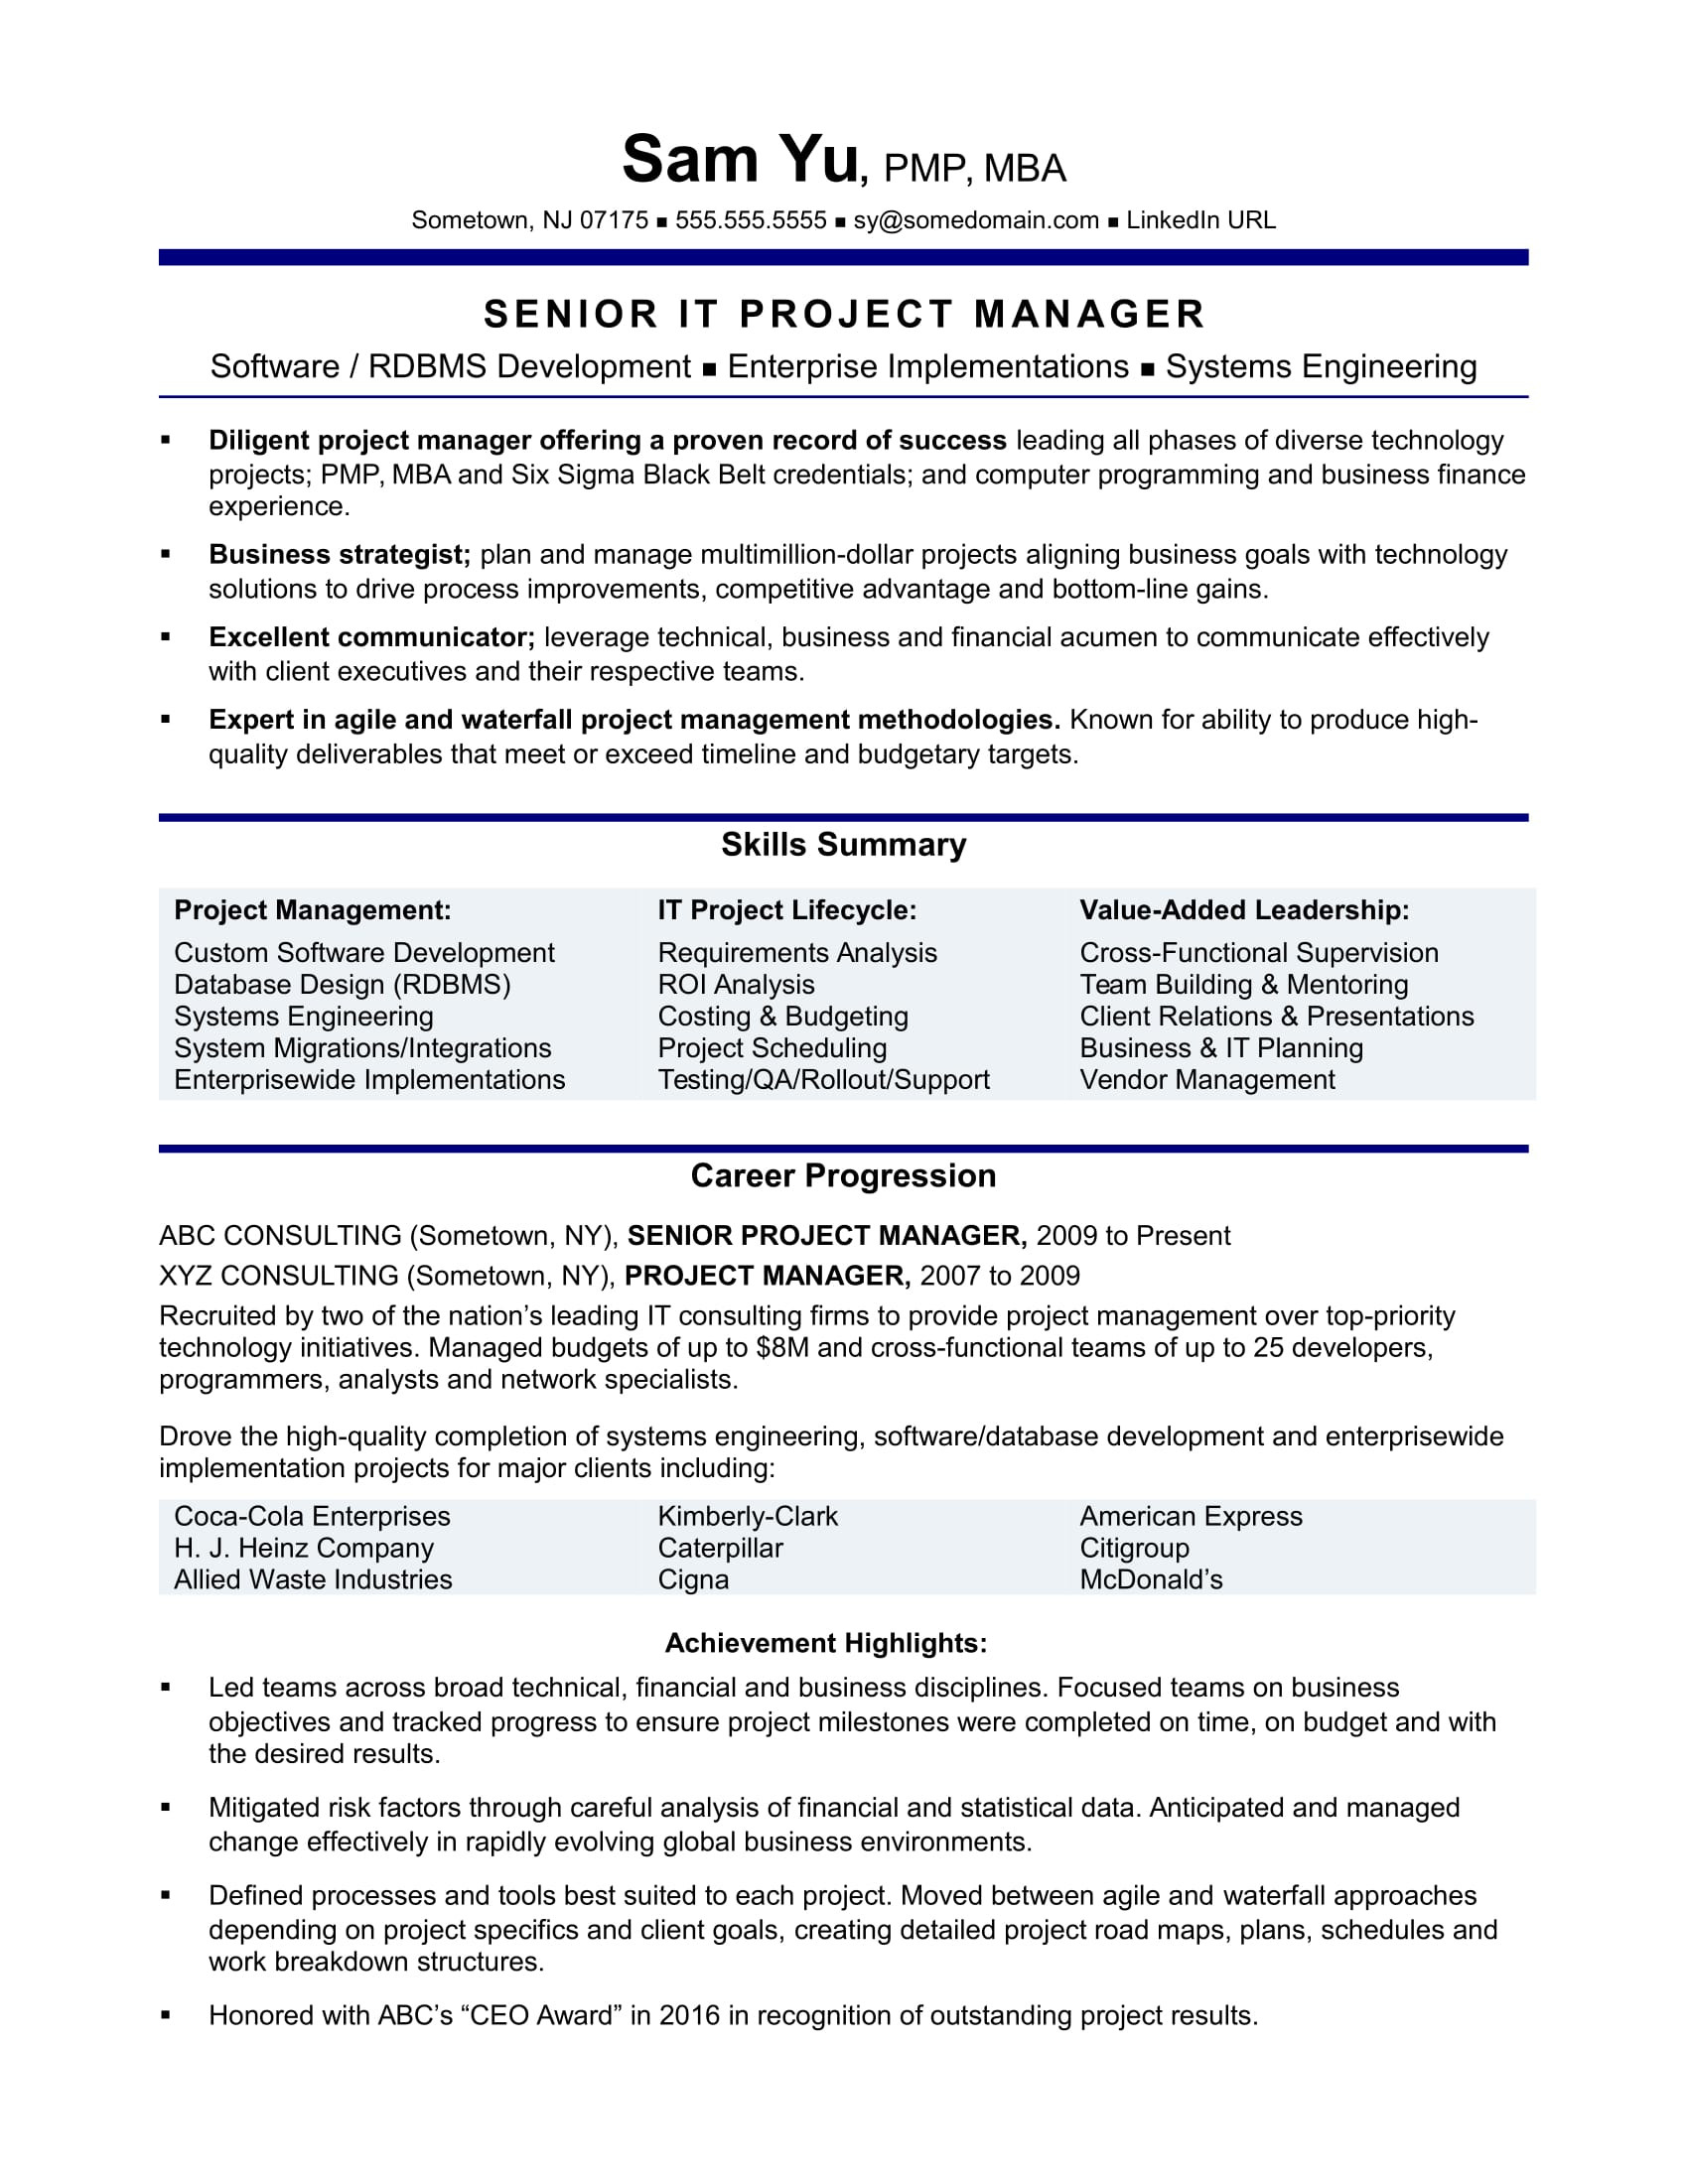 Sample Resume for Project Management Consultant It Project Manager Resume Monster.com